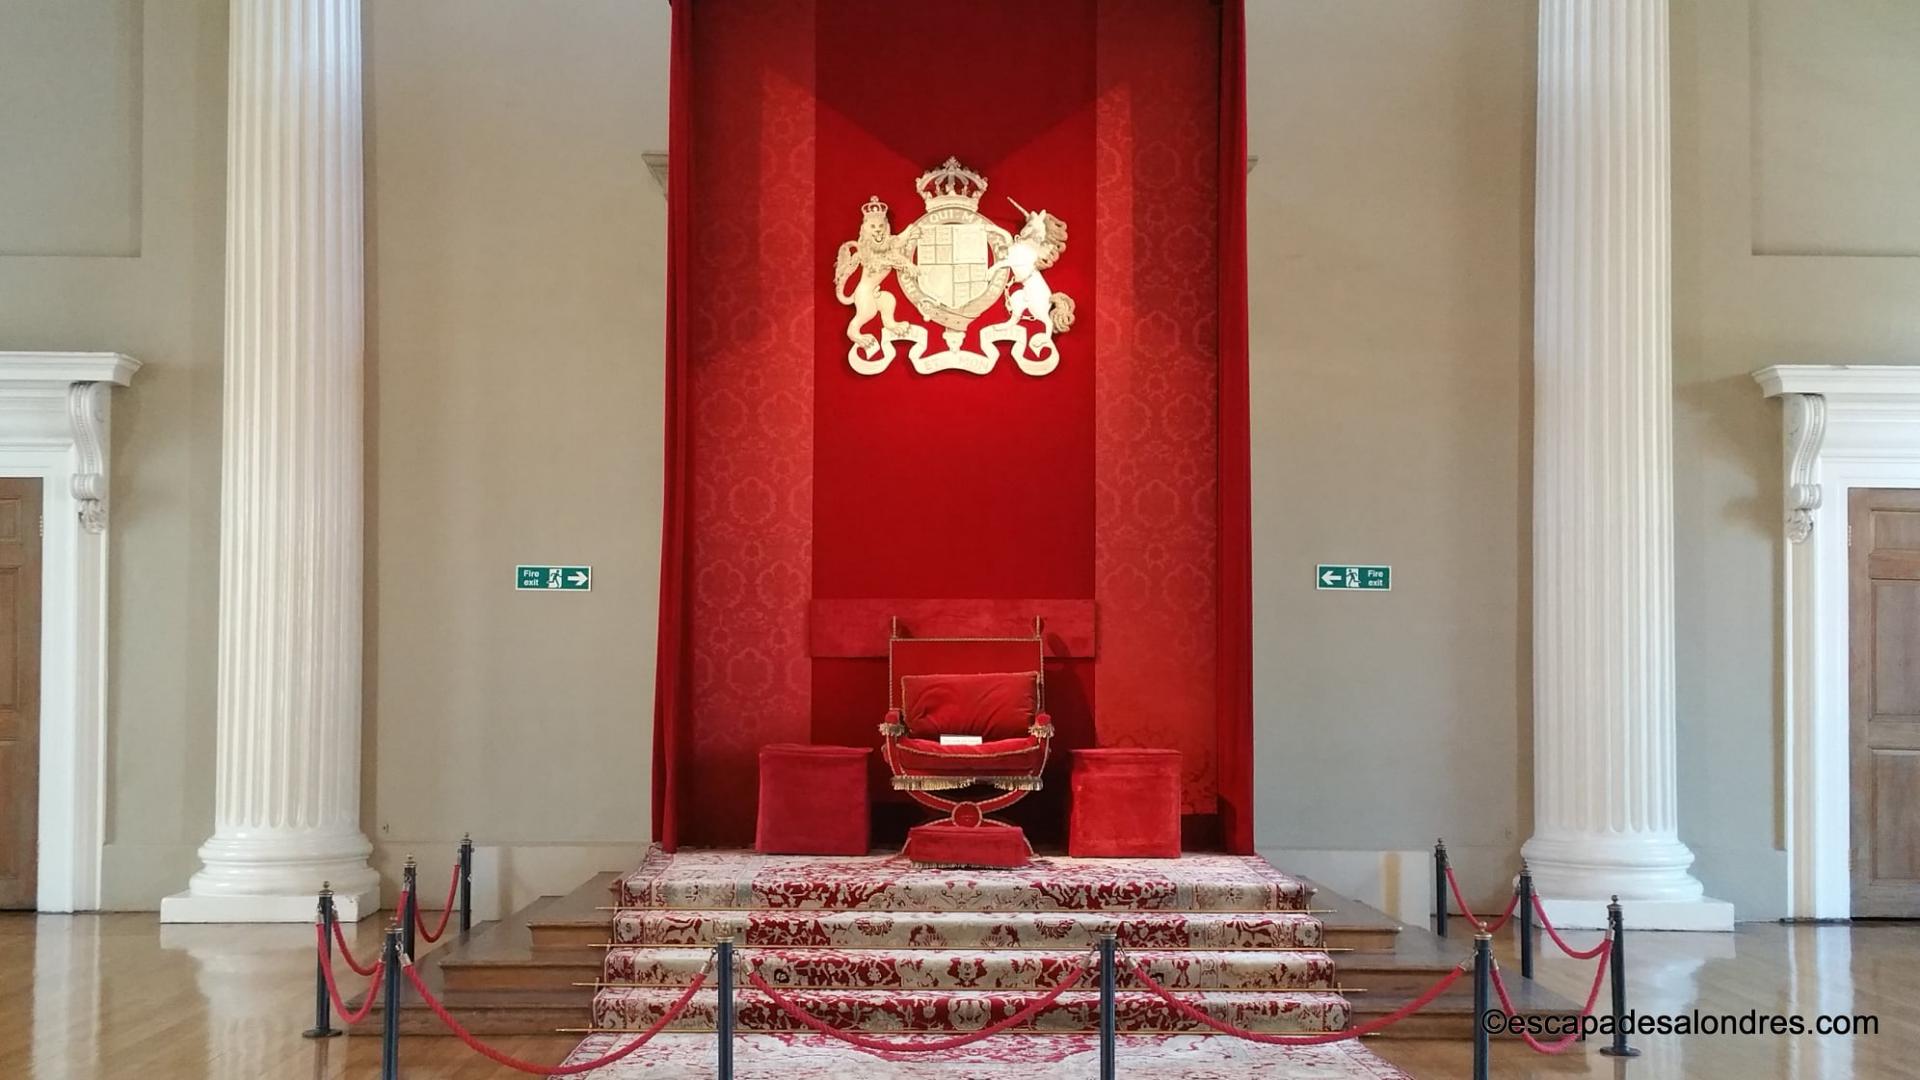 Banqueting house the king s throne